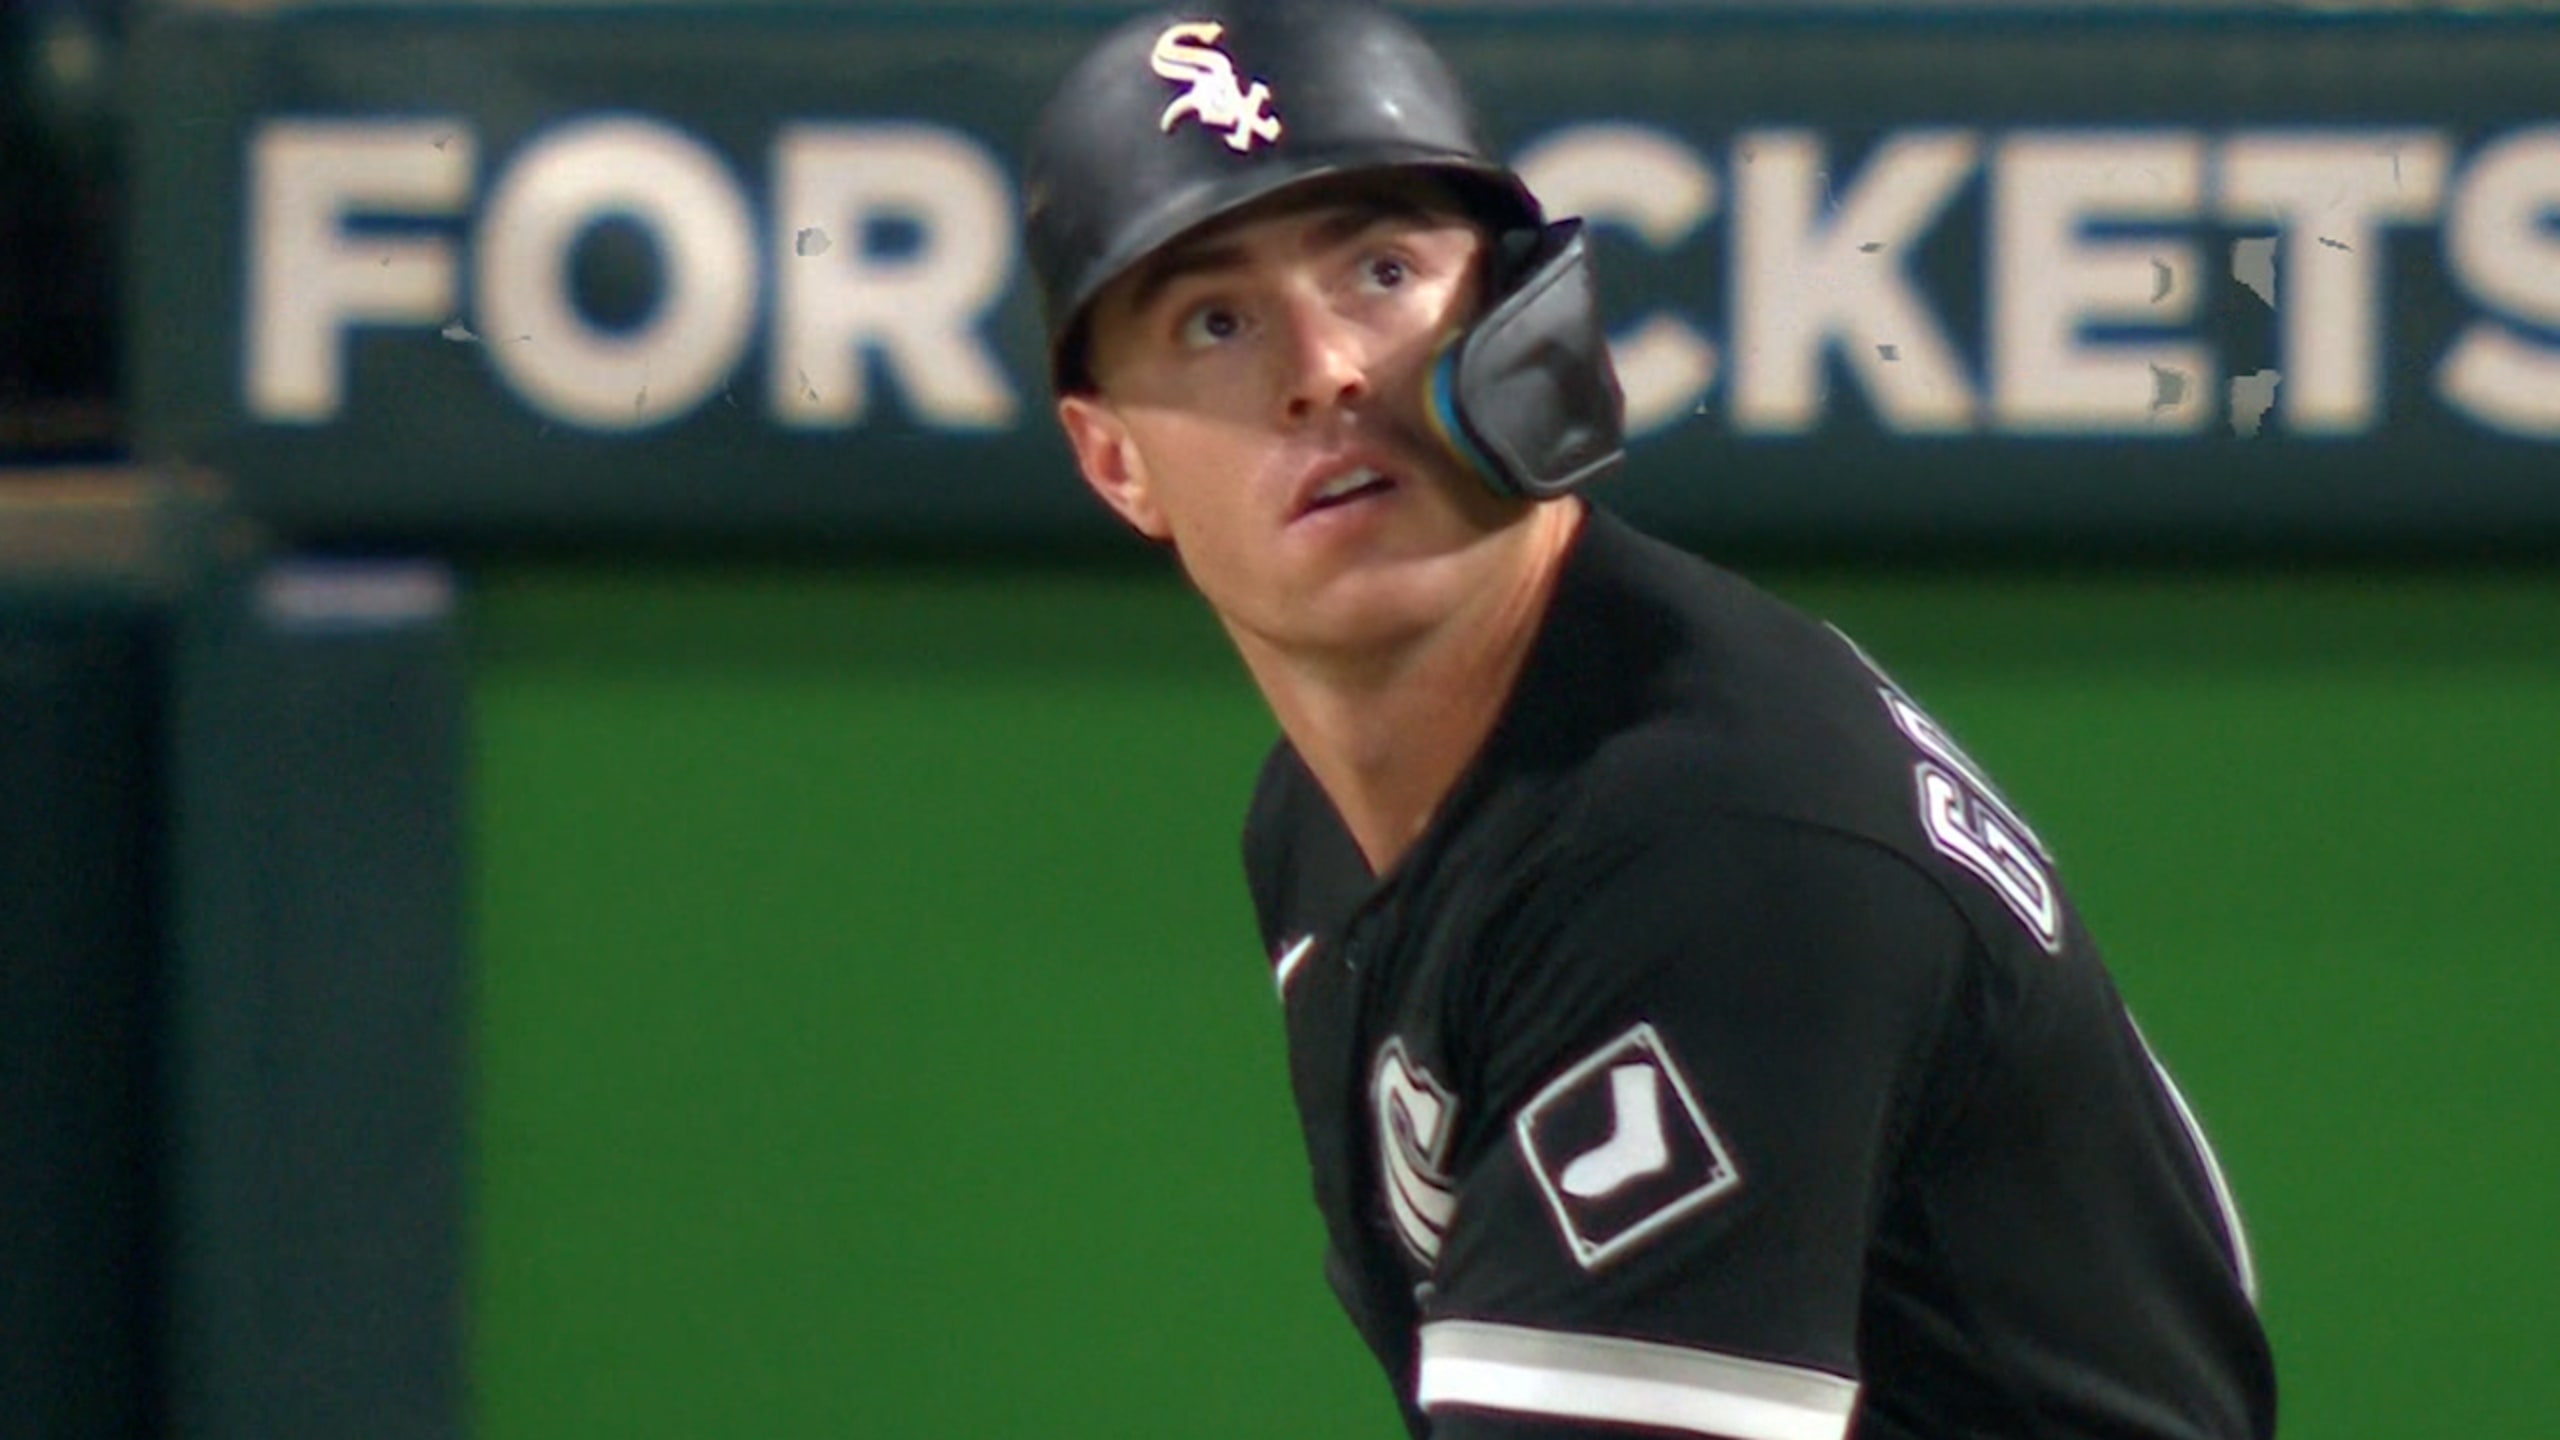 Cease, White Sox top Twins 11-0 to win big series into break –